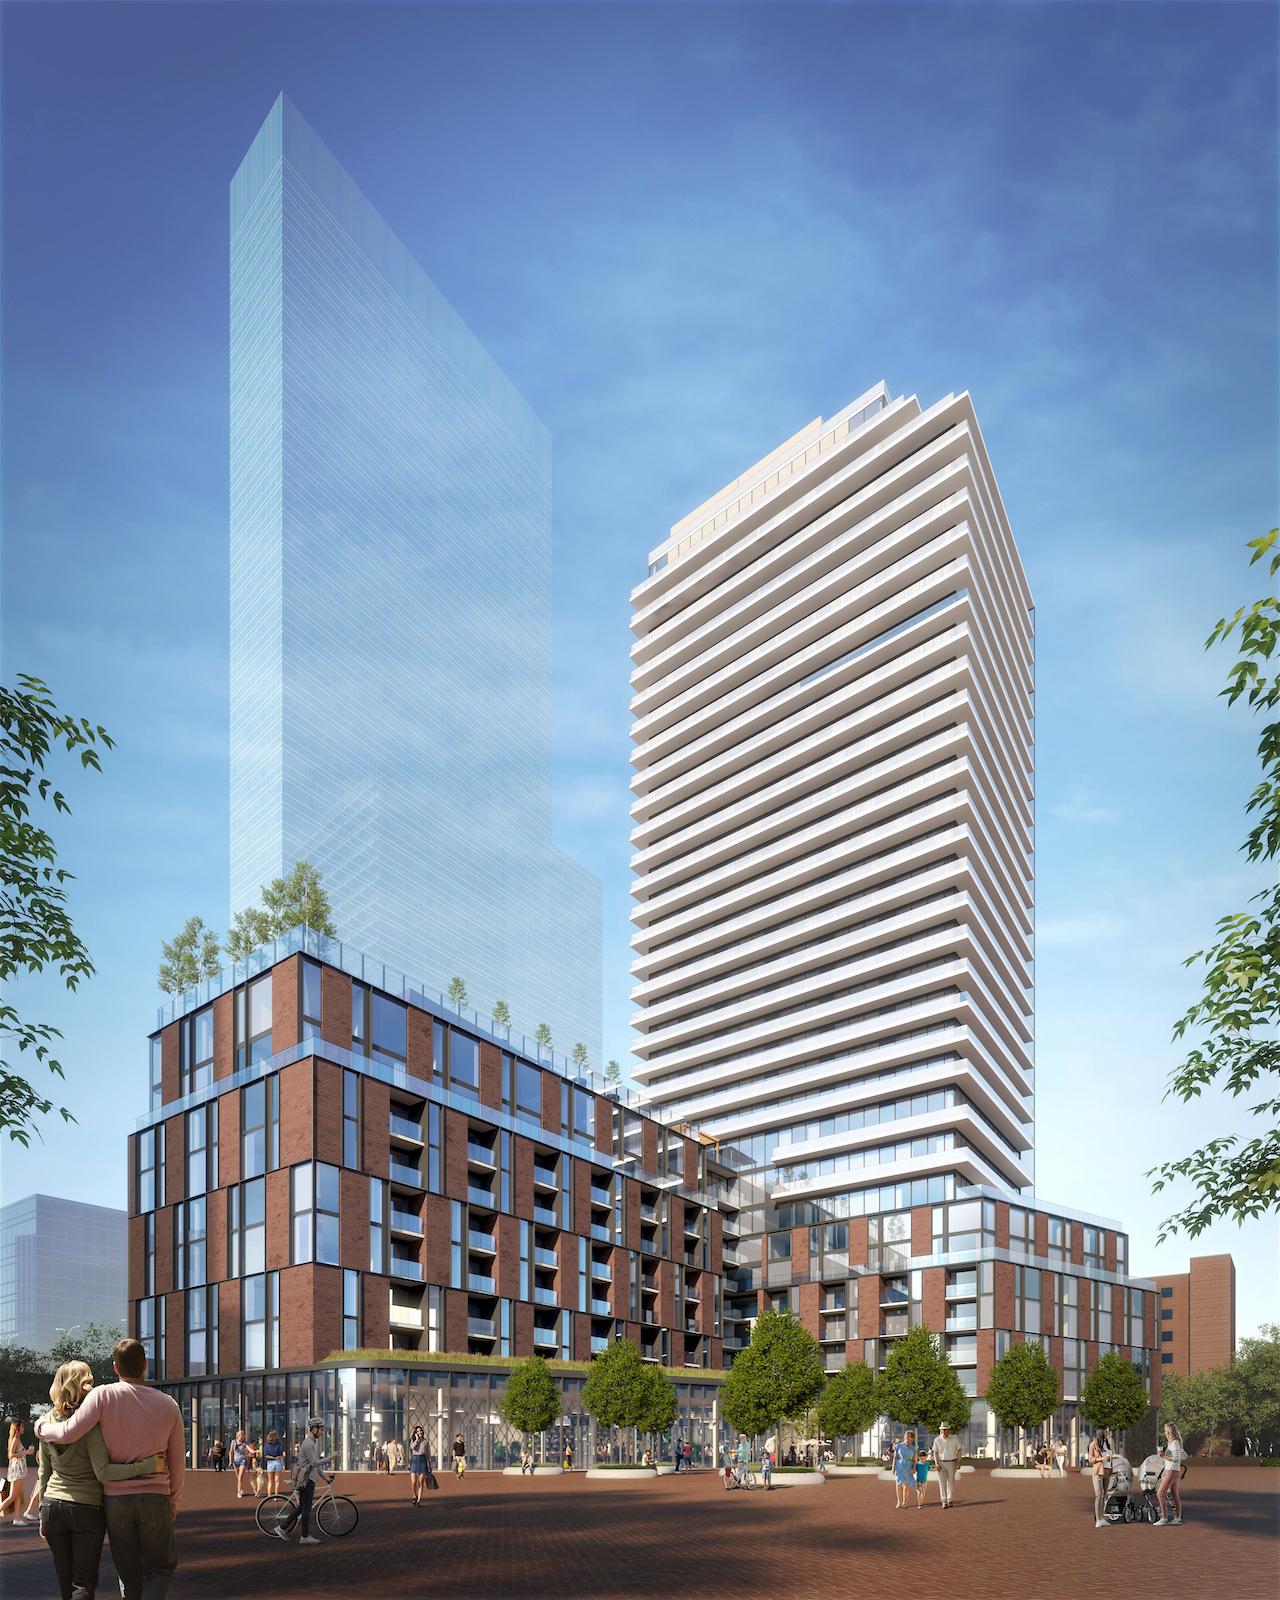 The Goode Condos at 33 Parliament, designed by architectsAlliance for Graywood Developments